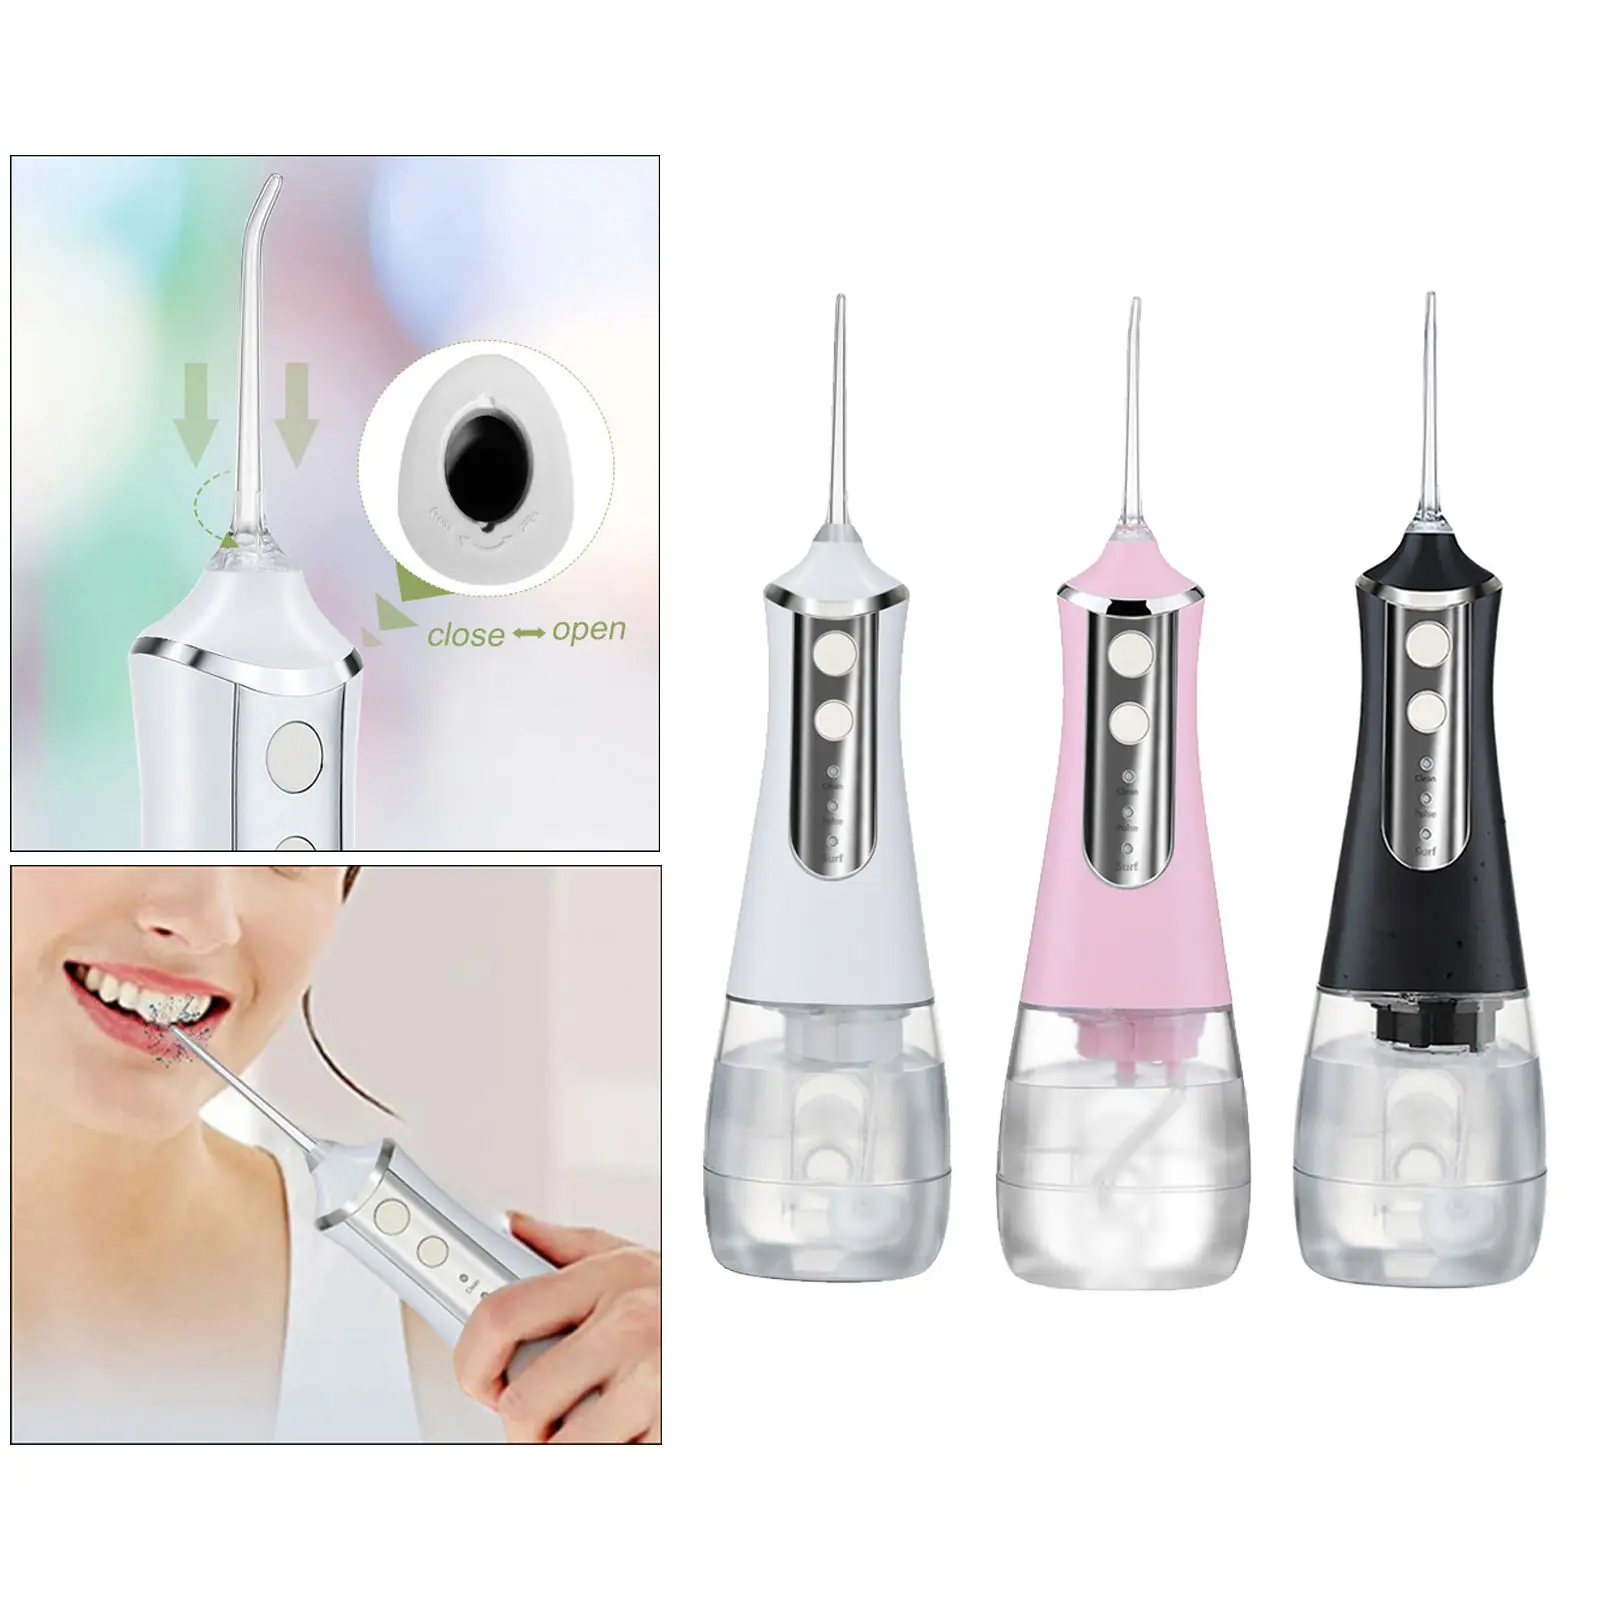 Water Flosser Professional Cordless 350ml Portable Waterproof Tool Kit Tooth Stain Eraser for Home Travel